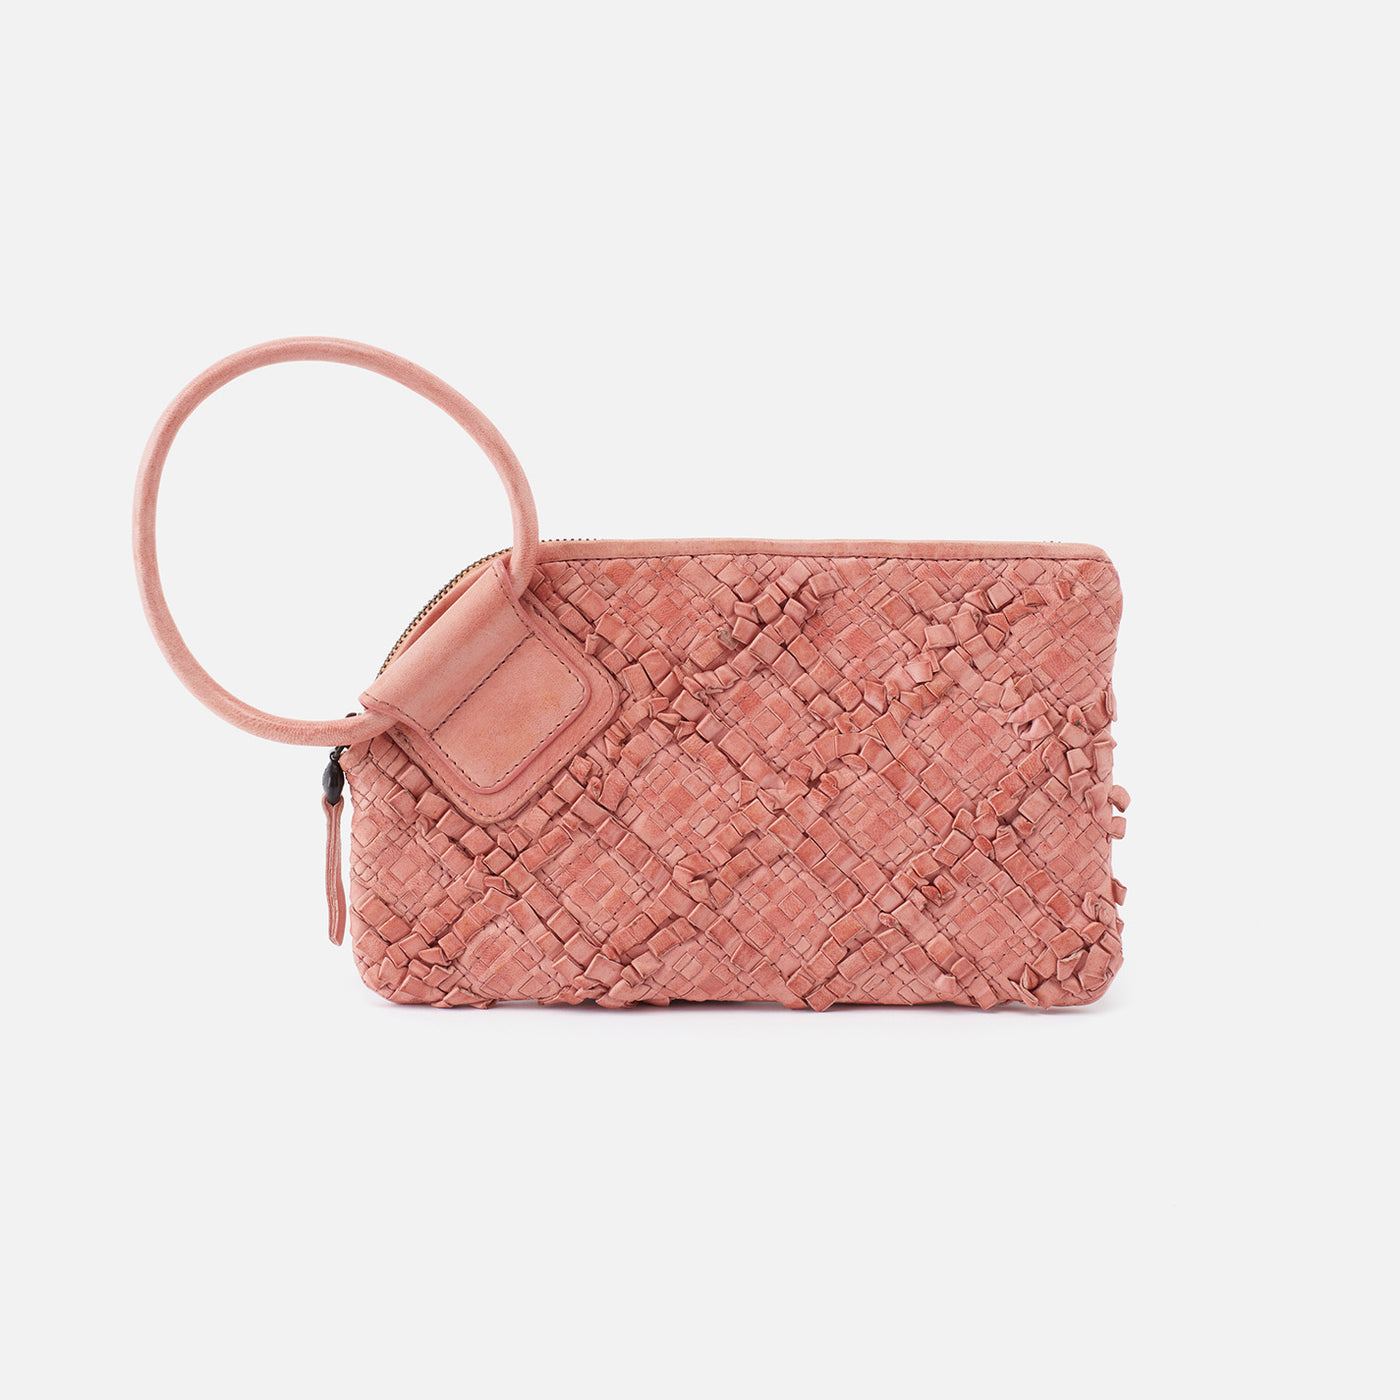 Sable Wristlet In Artisan Weave Leather